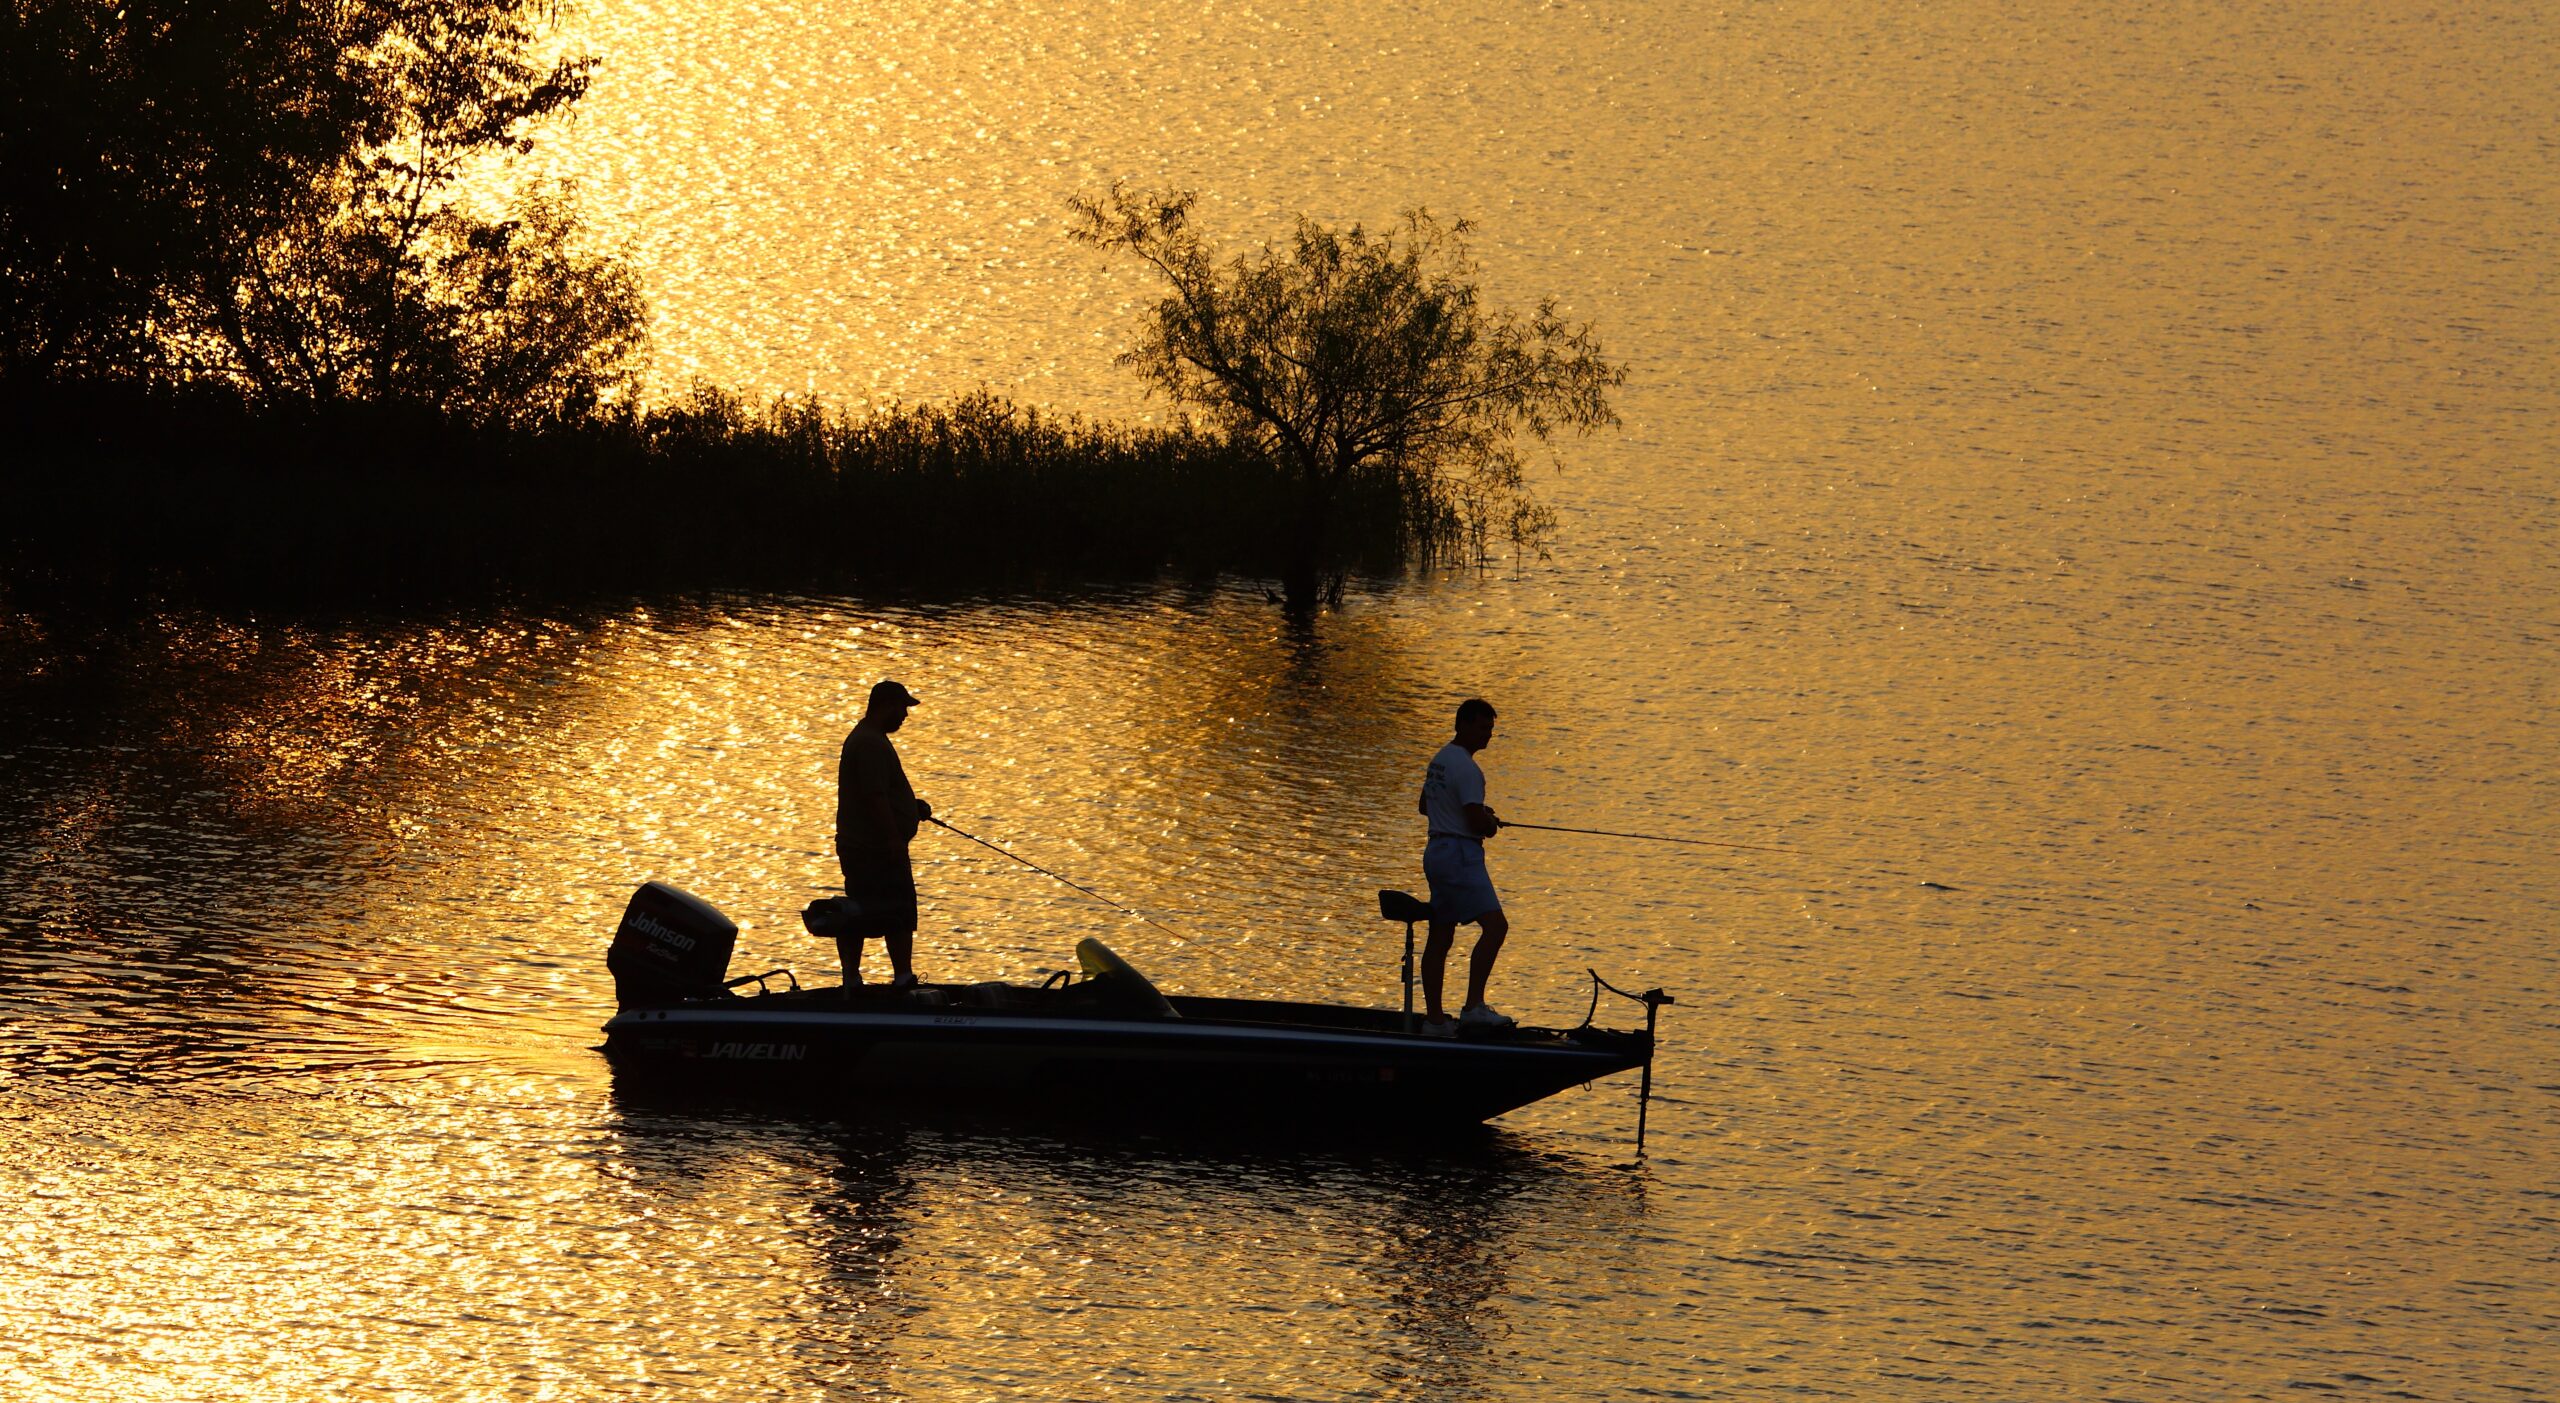 image: sunset fishing. credit: Don McCullough via CC-BY-2.0, CreativeCommons.org.